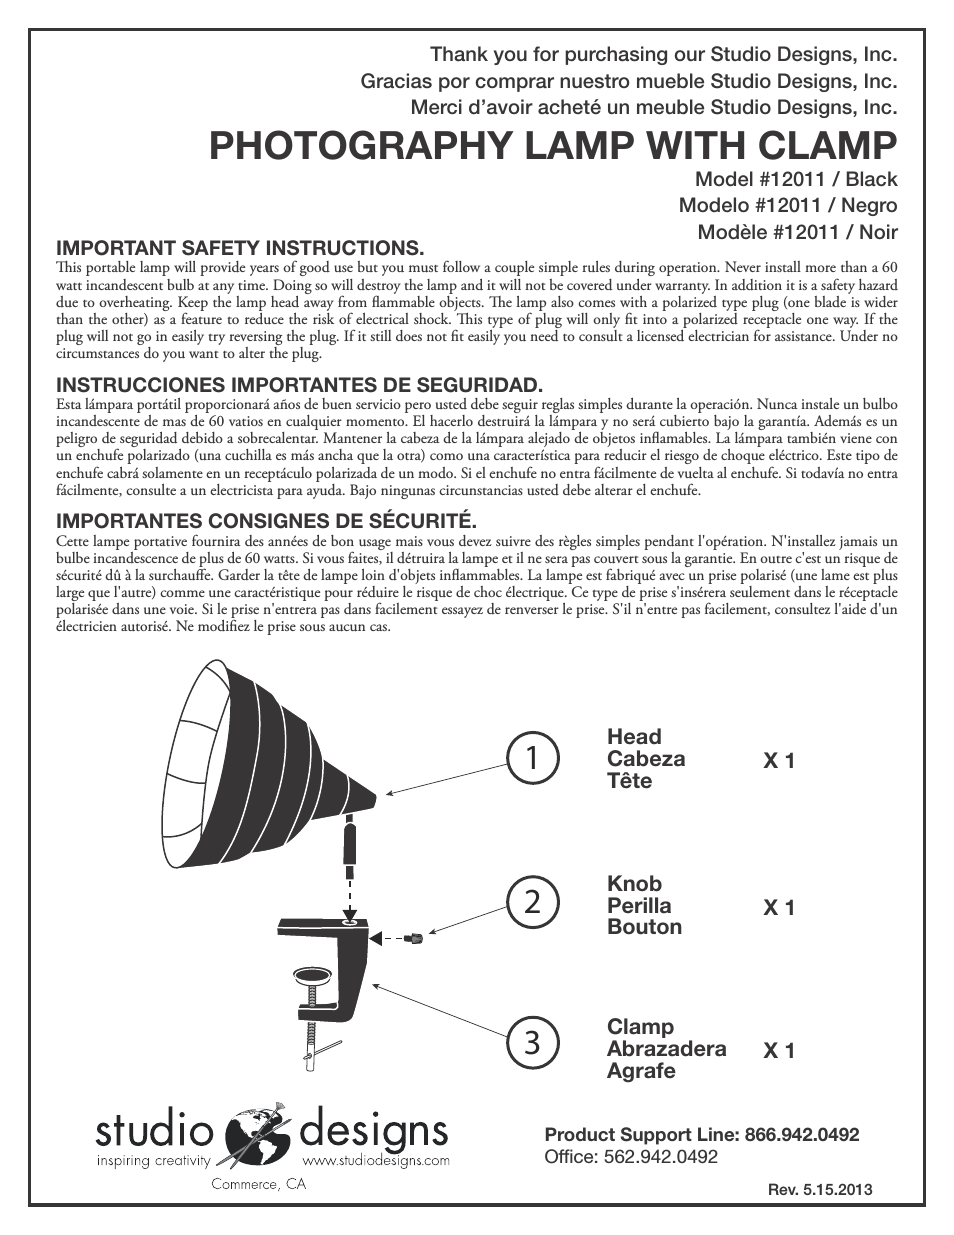 Photography Lamp with Clamp